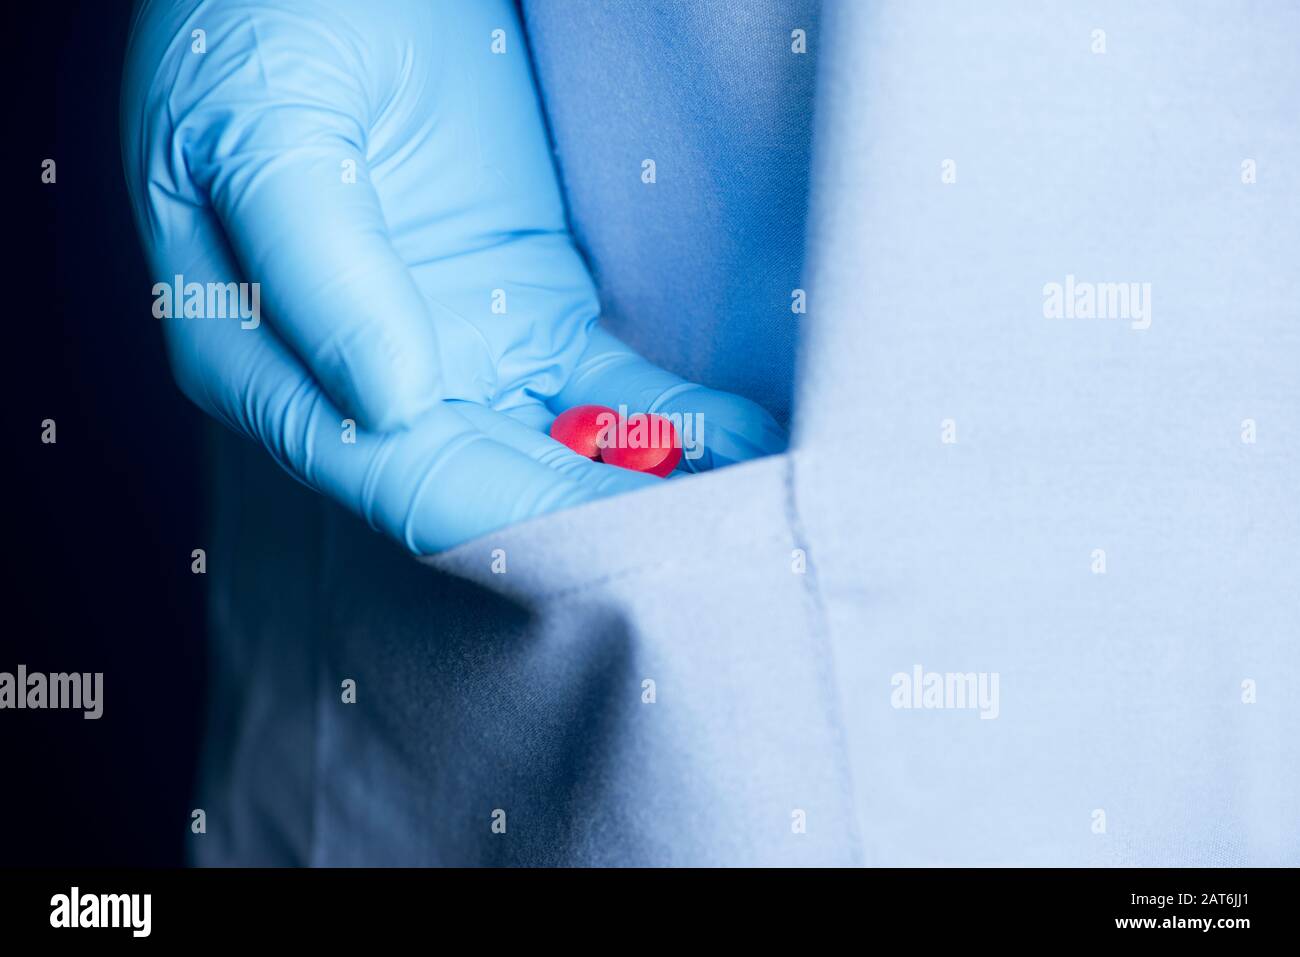 Gloved hand of healthcare worker slips narcotic medication tablets  into pocket of scrub shirt. Stock Photo